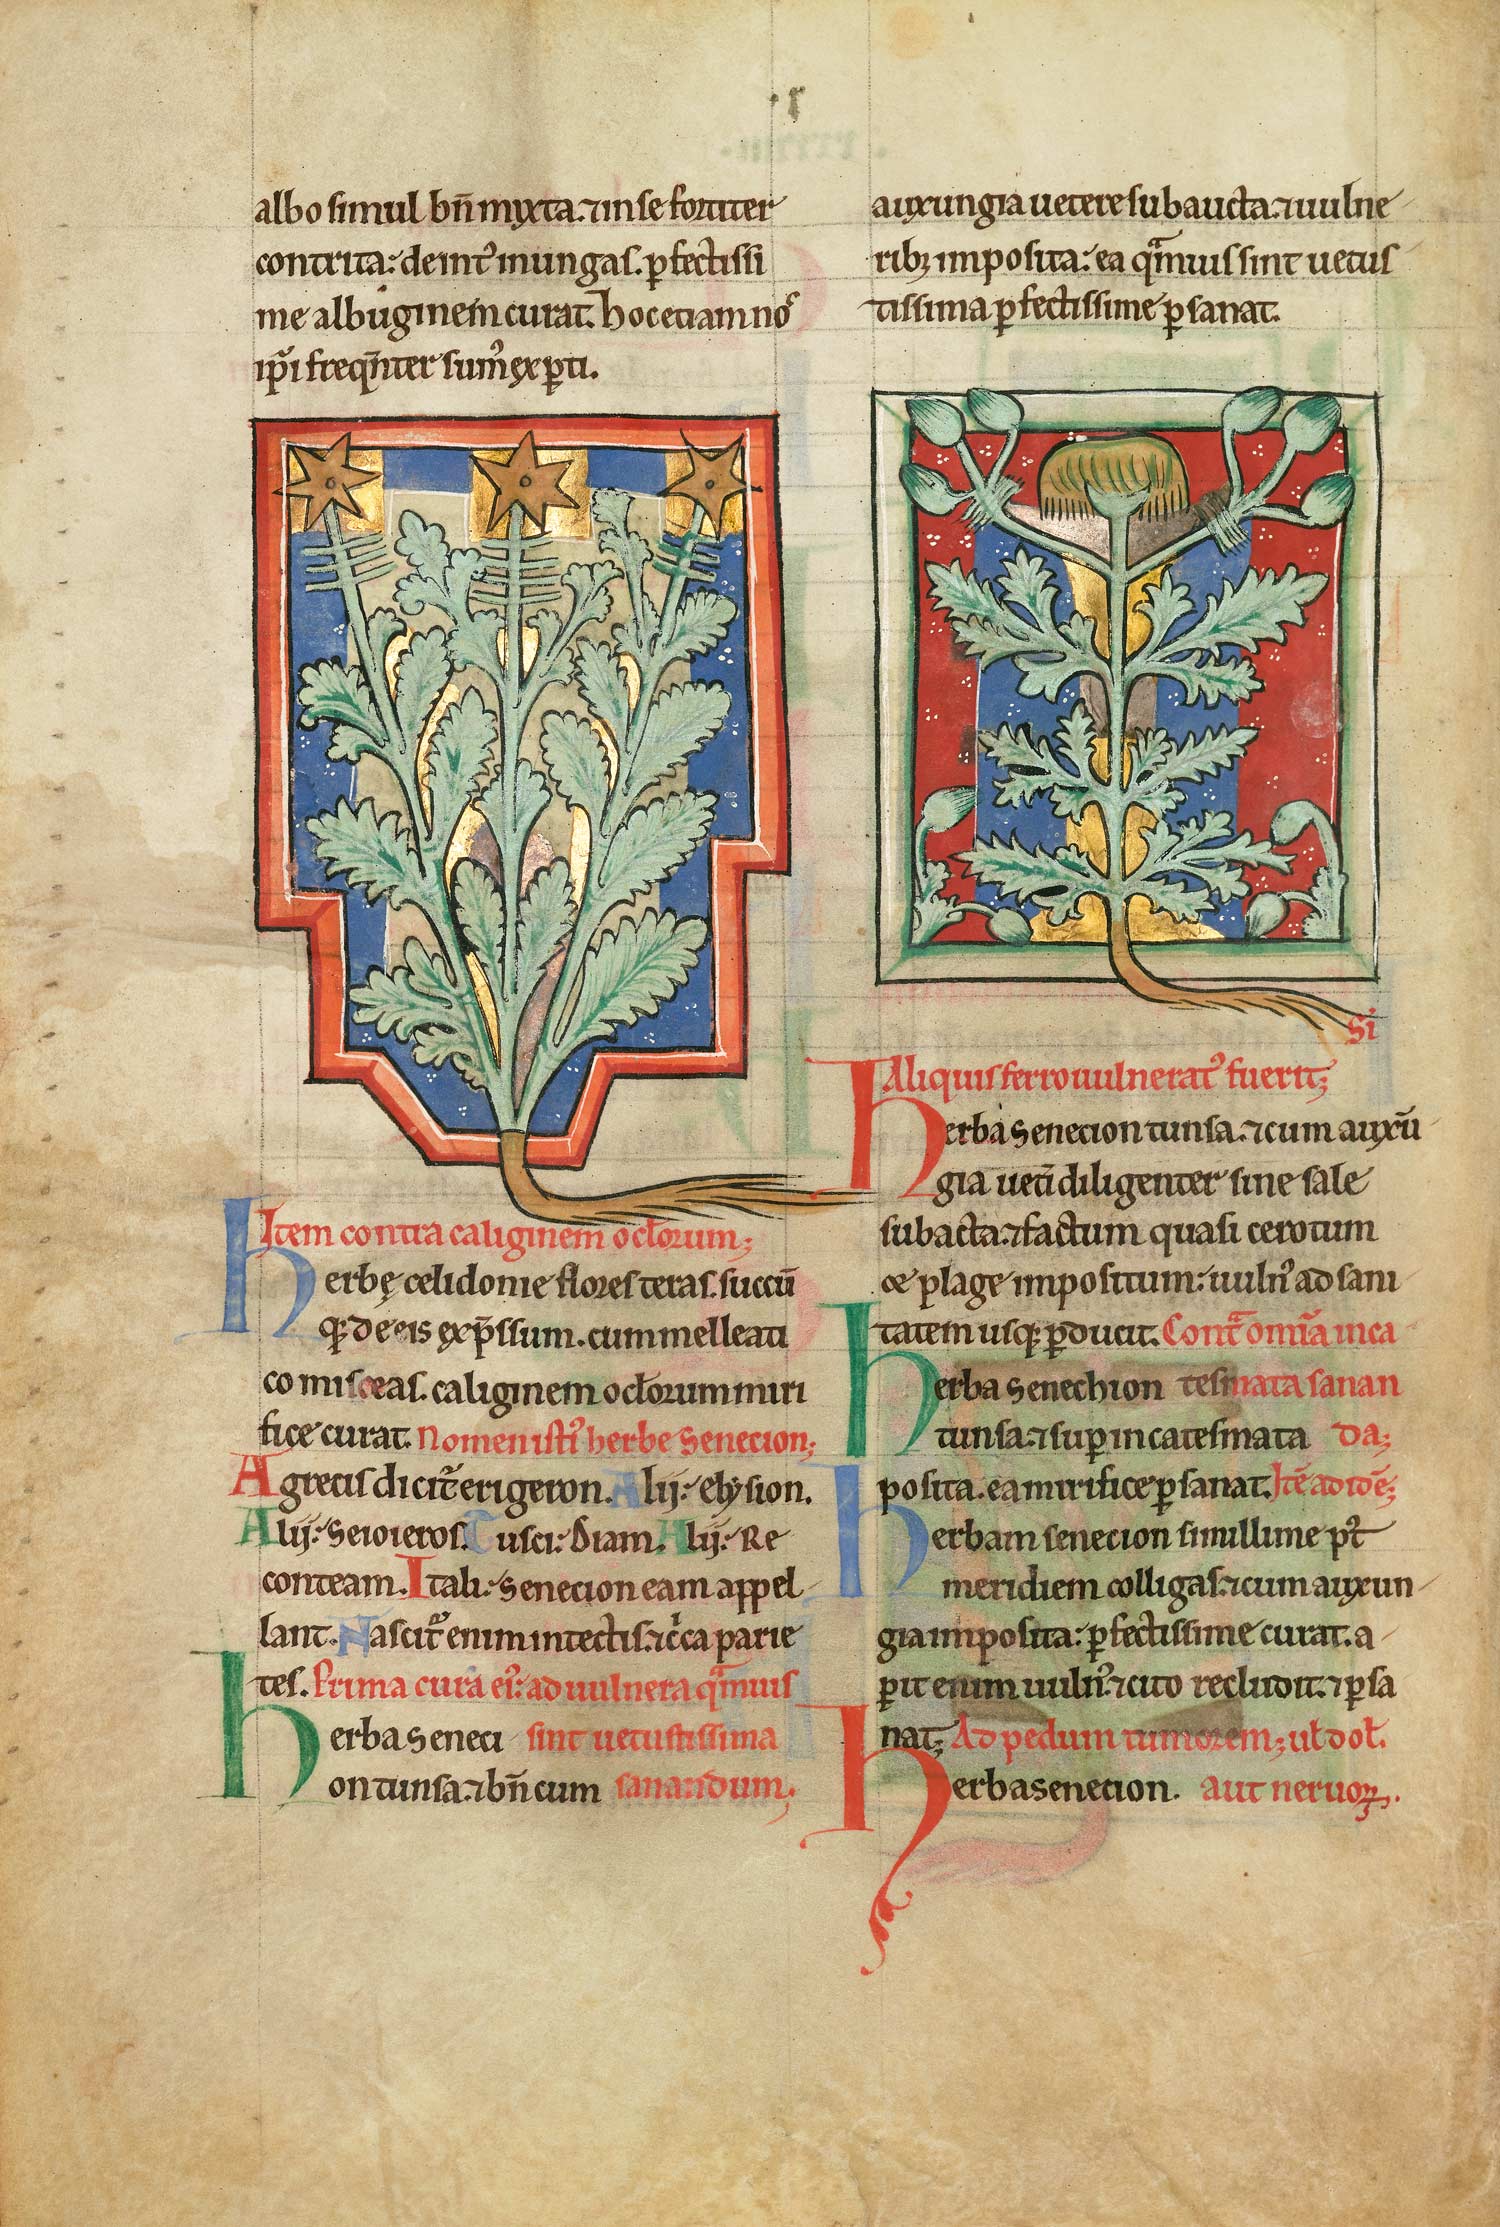 A fine art single page from the facsimile About Plants and Animals.